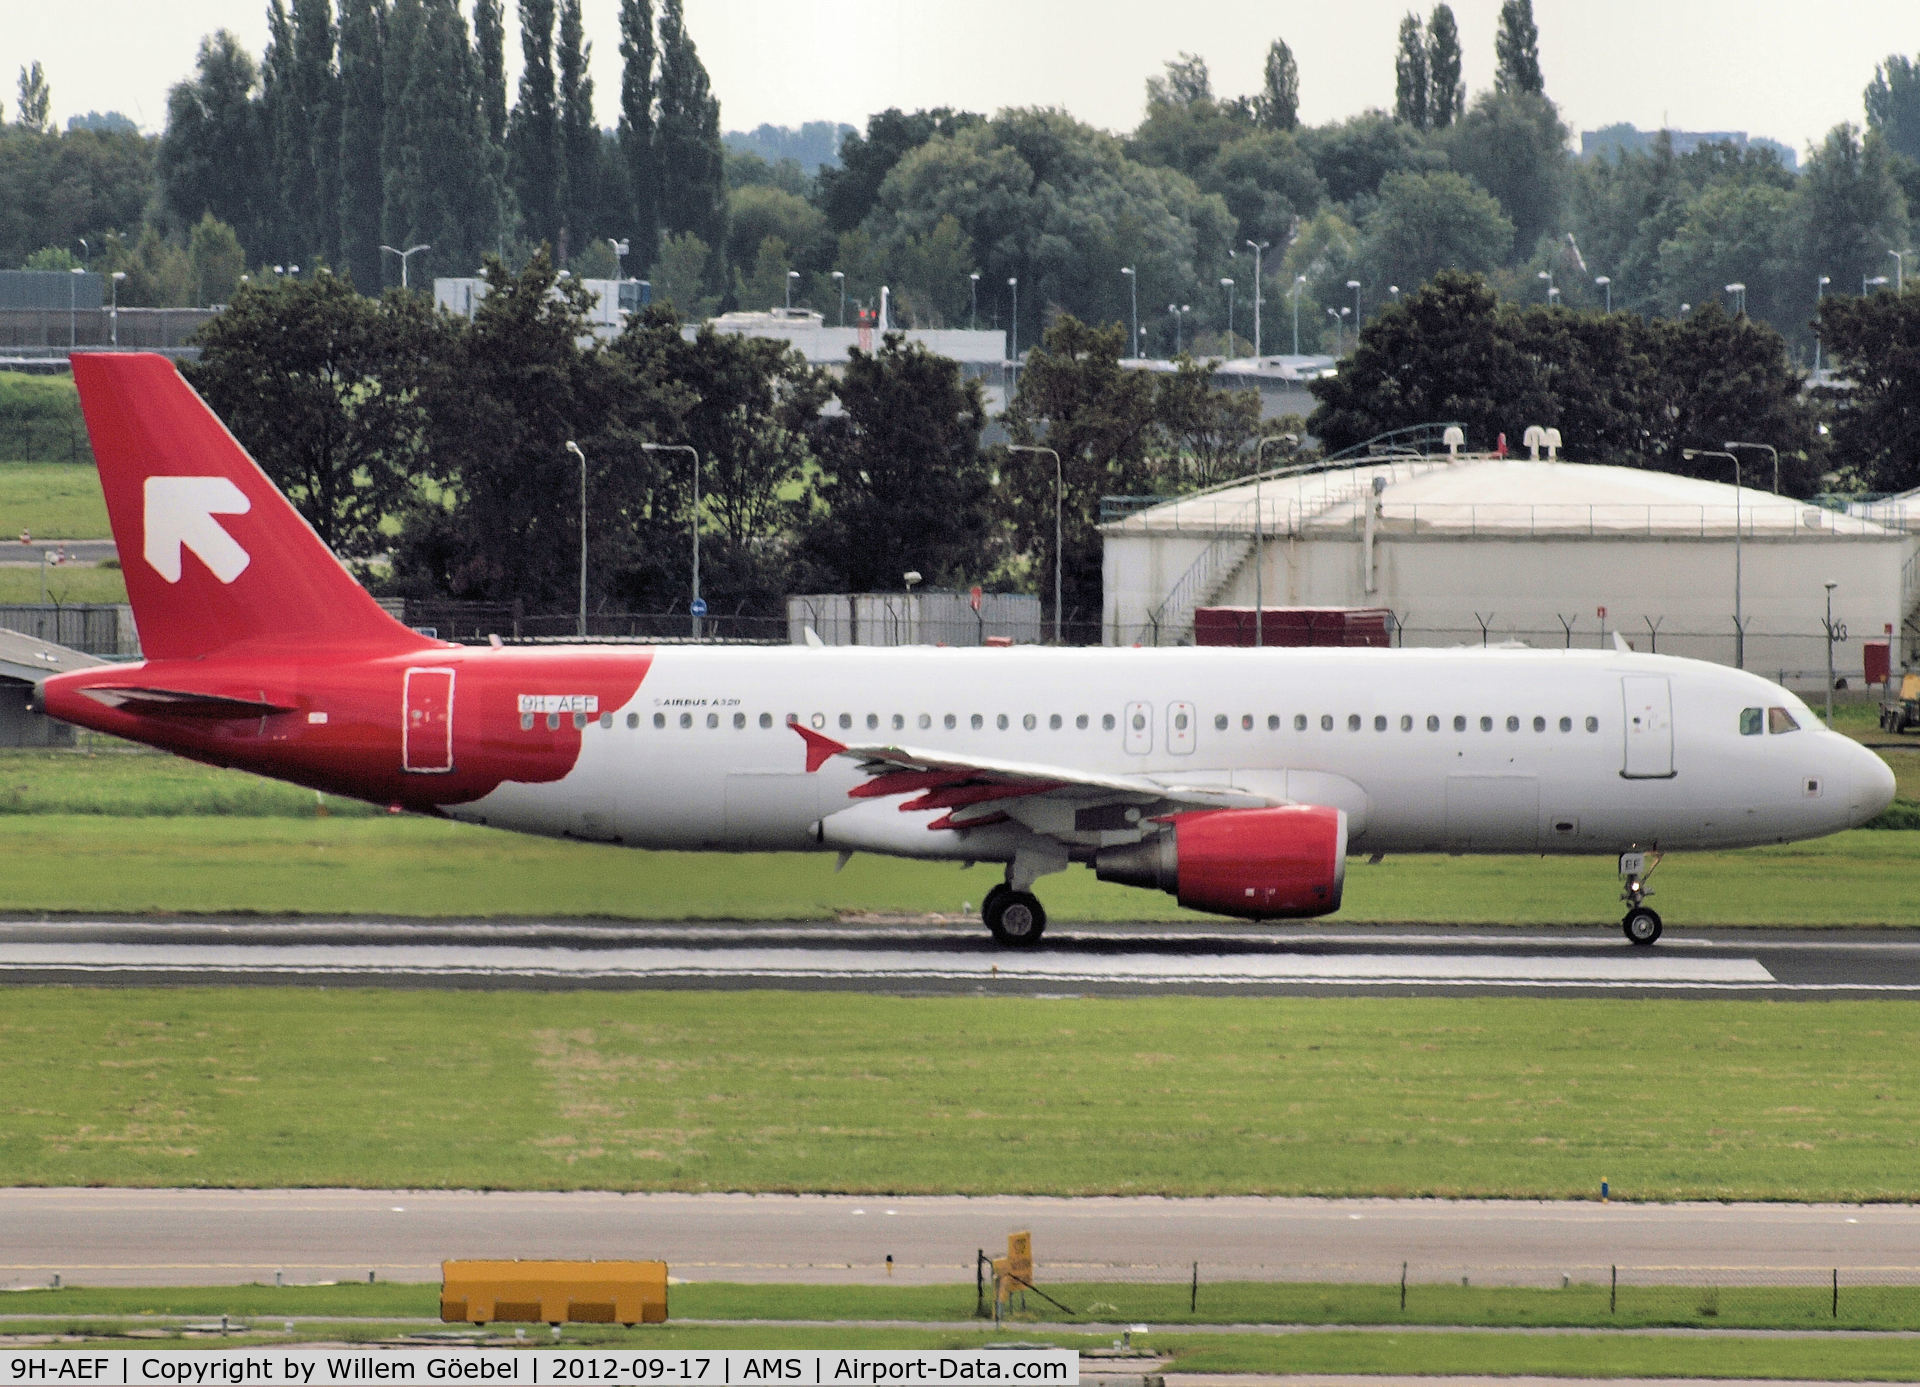 9H-AEF, 2003 Airbus A320-214 C/N 2142, Taxi to runway 24 of Amsterdam Airport